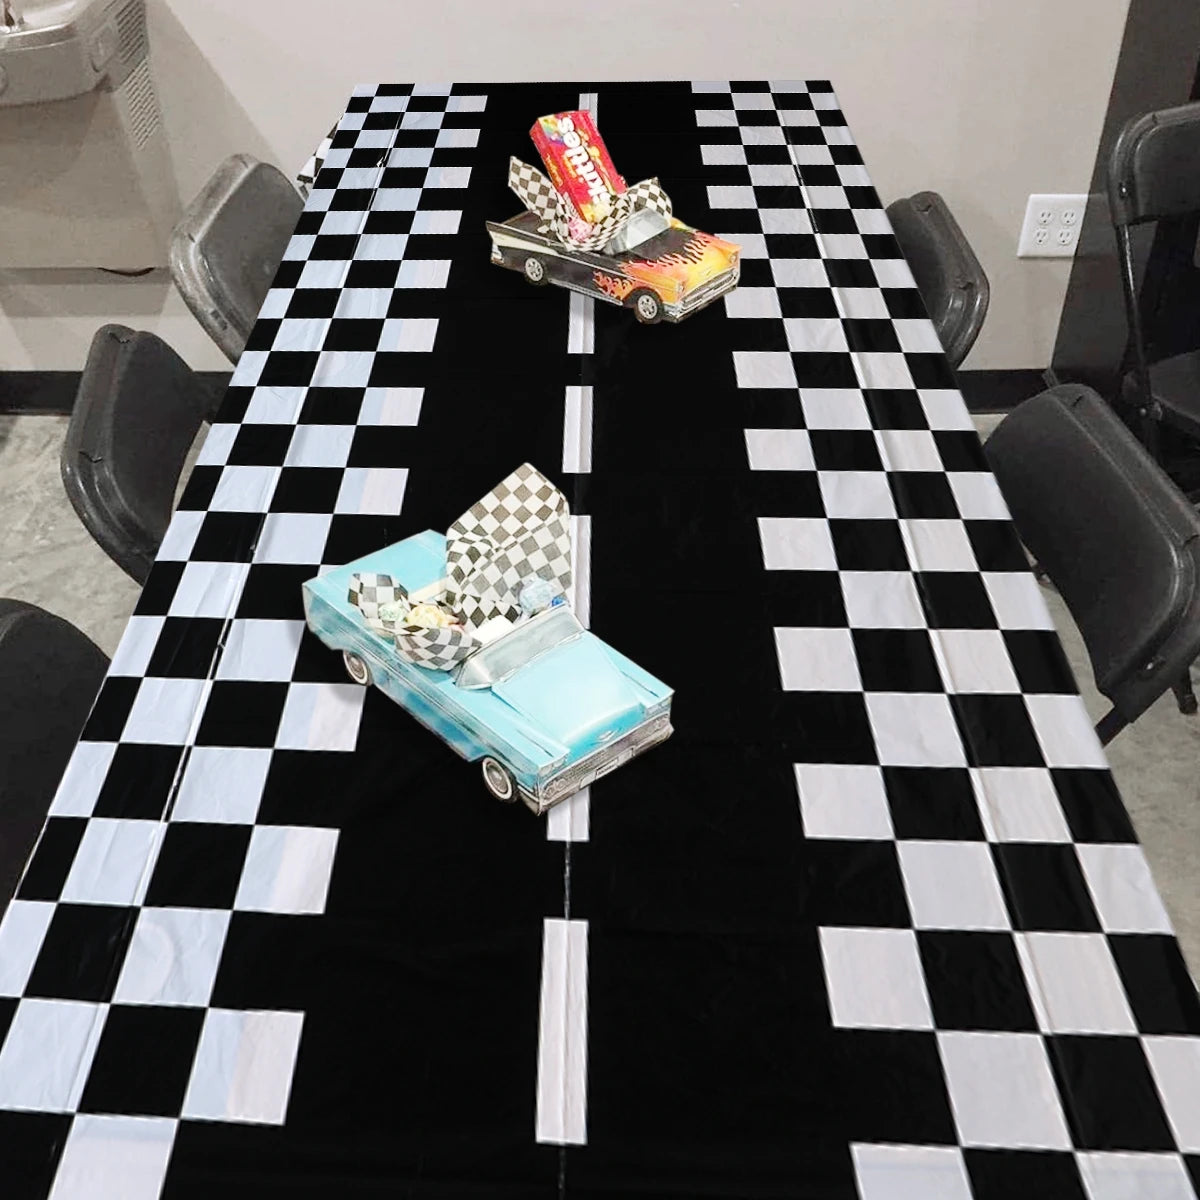 Checkered Tablecloths Race Car Party Decoration Black White Checkered Flag Racetrack Tablecover Birthday Party Supplies for Boys